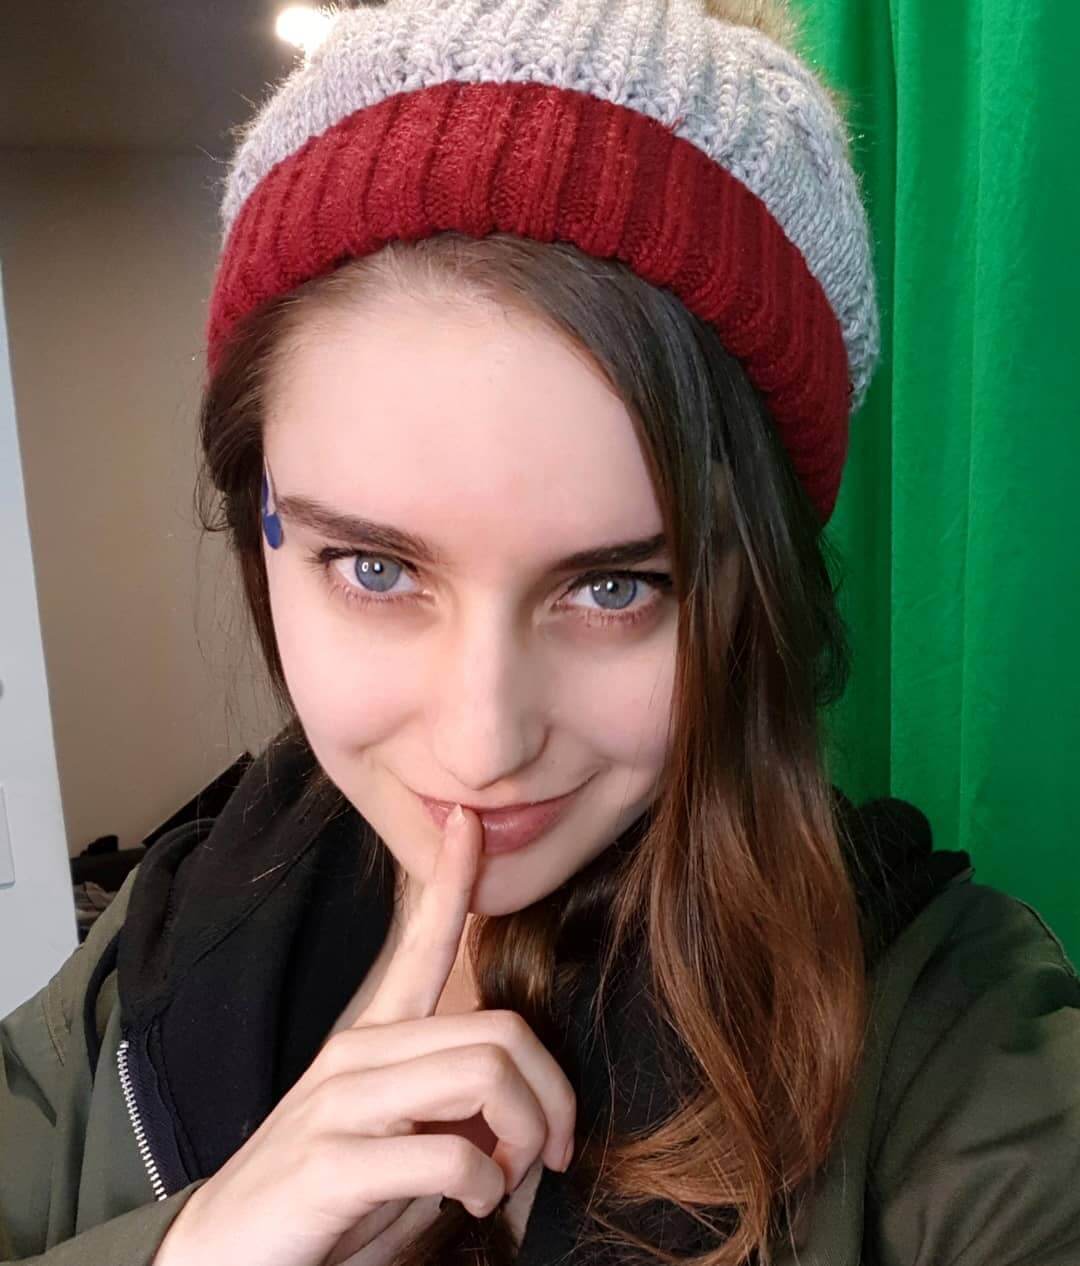 70+ Loserfruit Hot Pictures Are Too Much For You To Handle 23